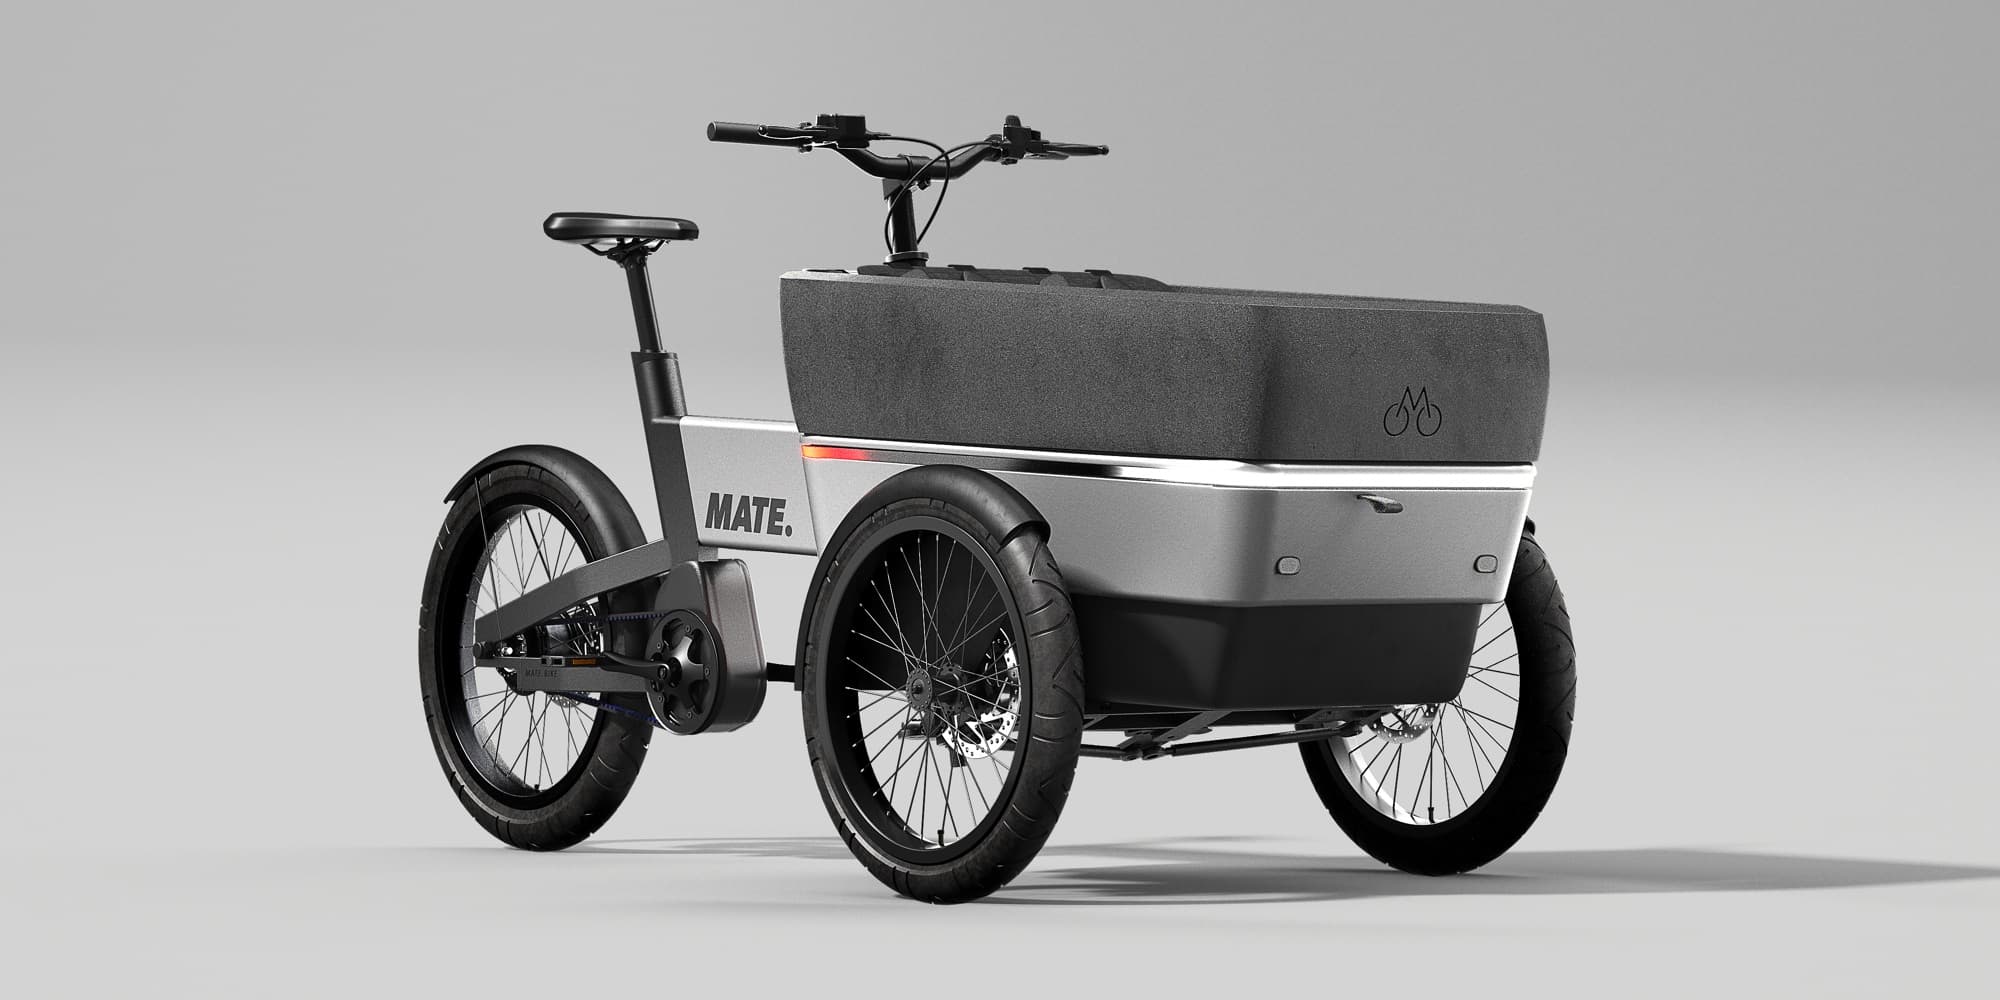 MATE SUV electric cargo bike is the family car of the e-bike world